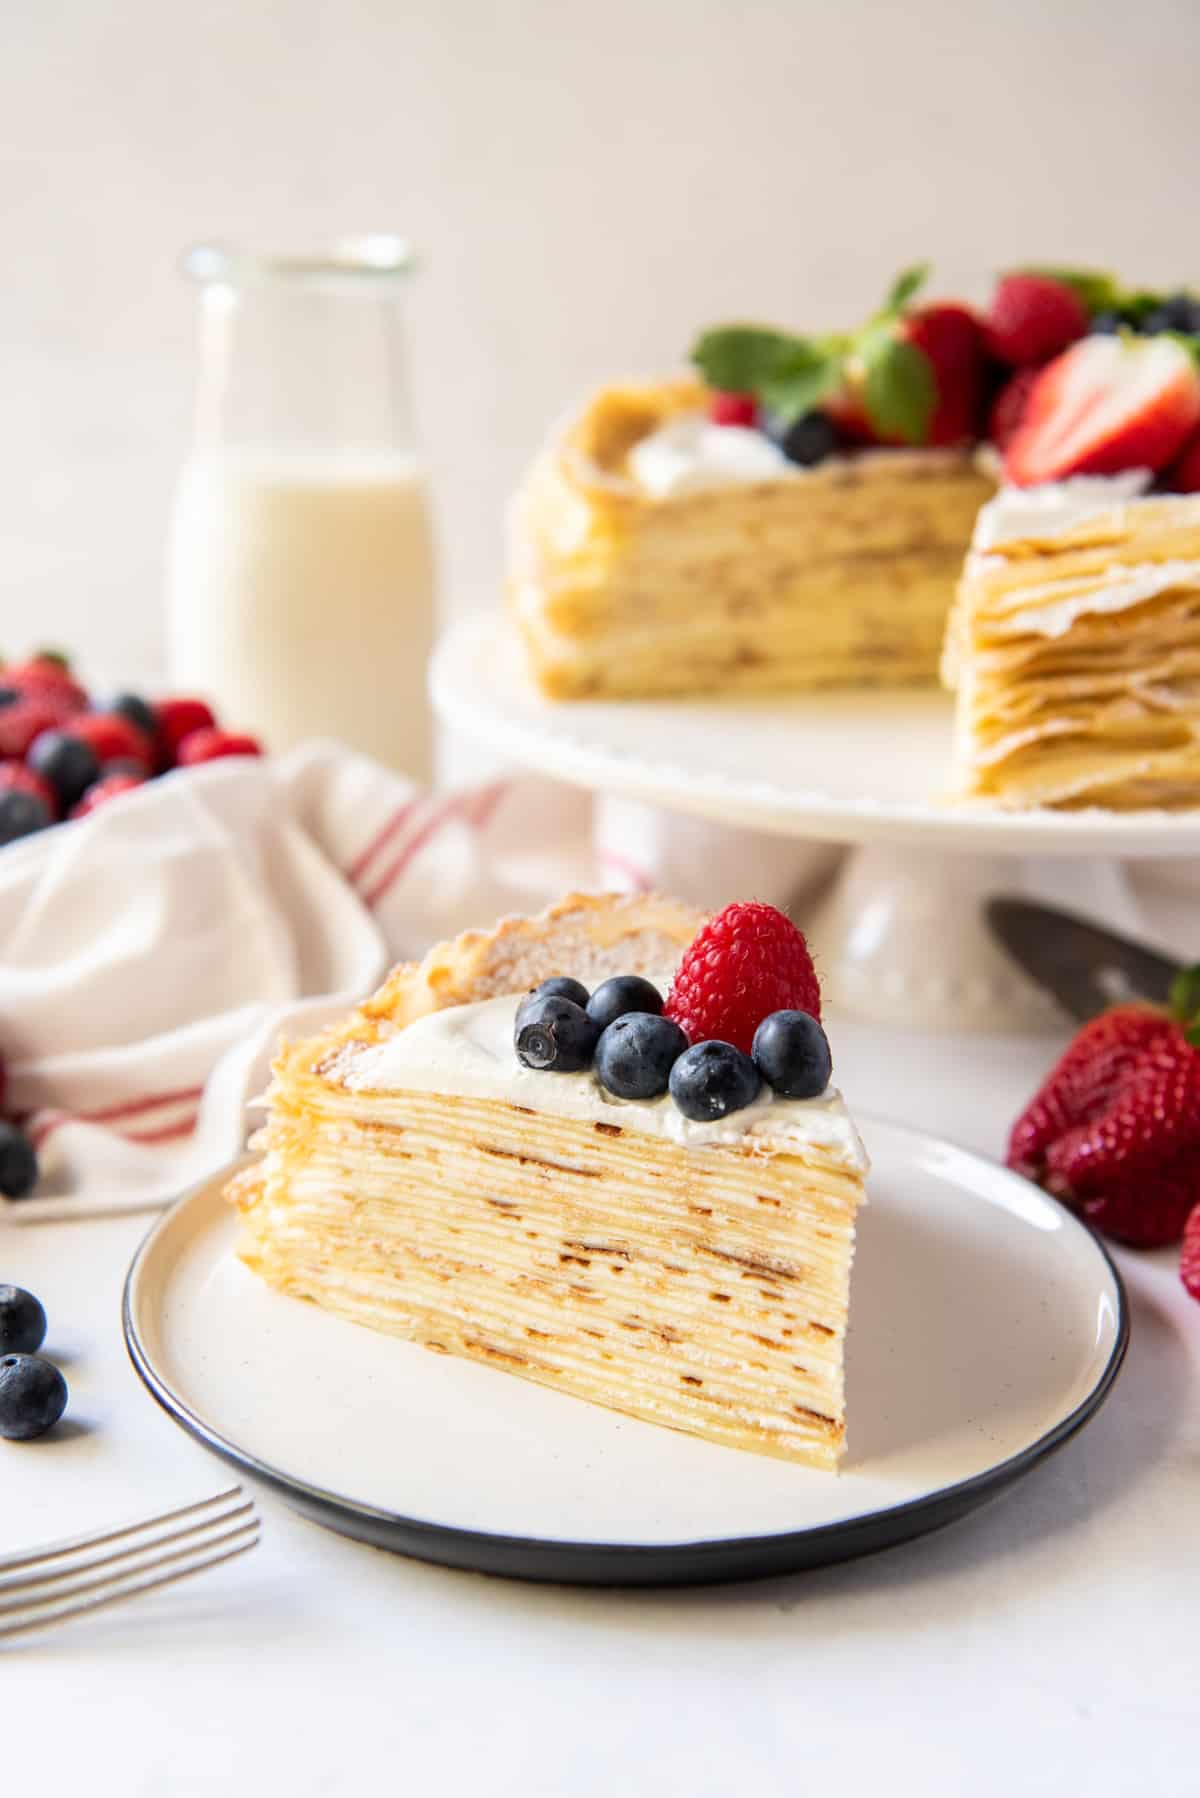 Serving of Easy Crepe Cake on White Plate